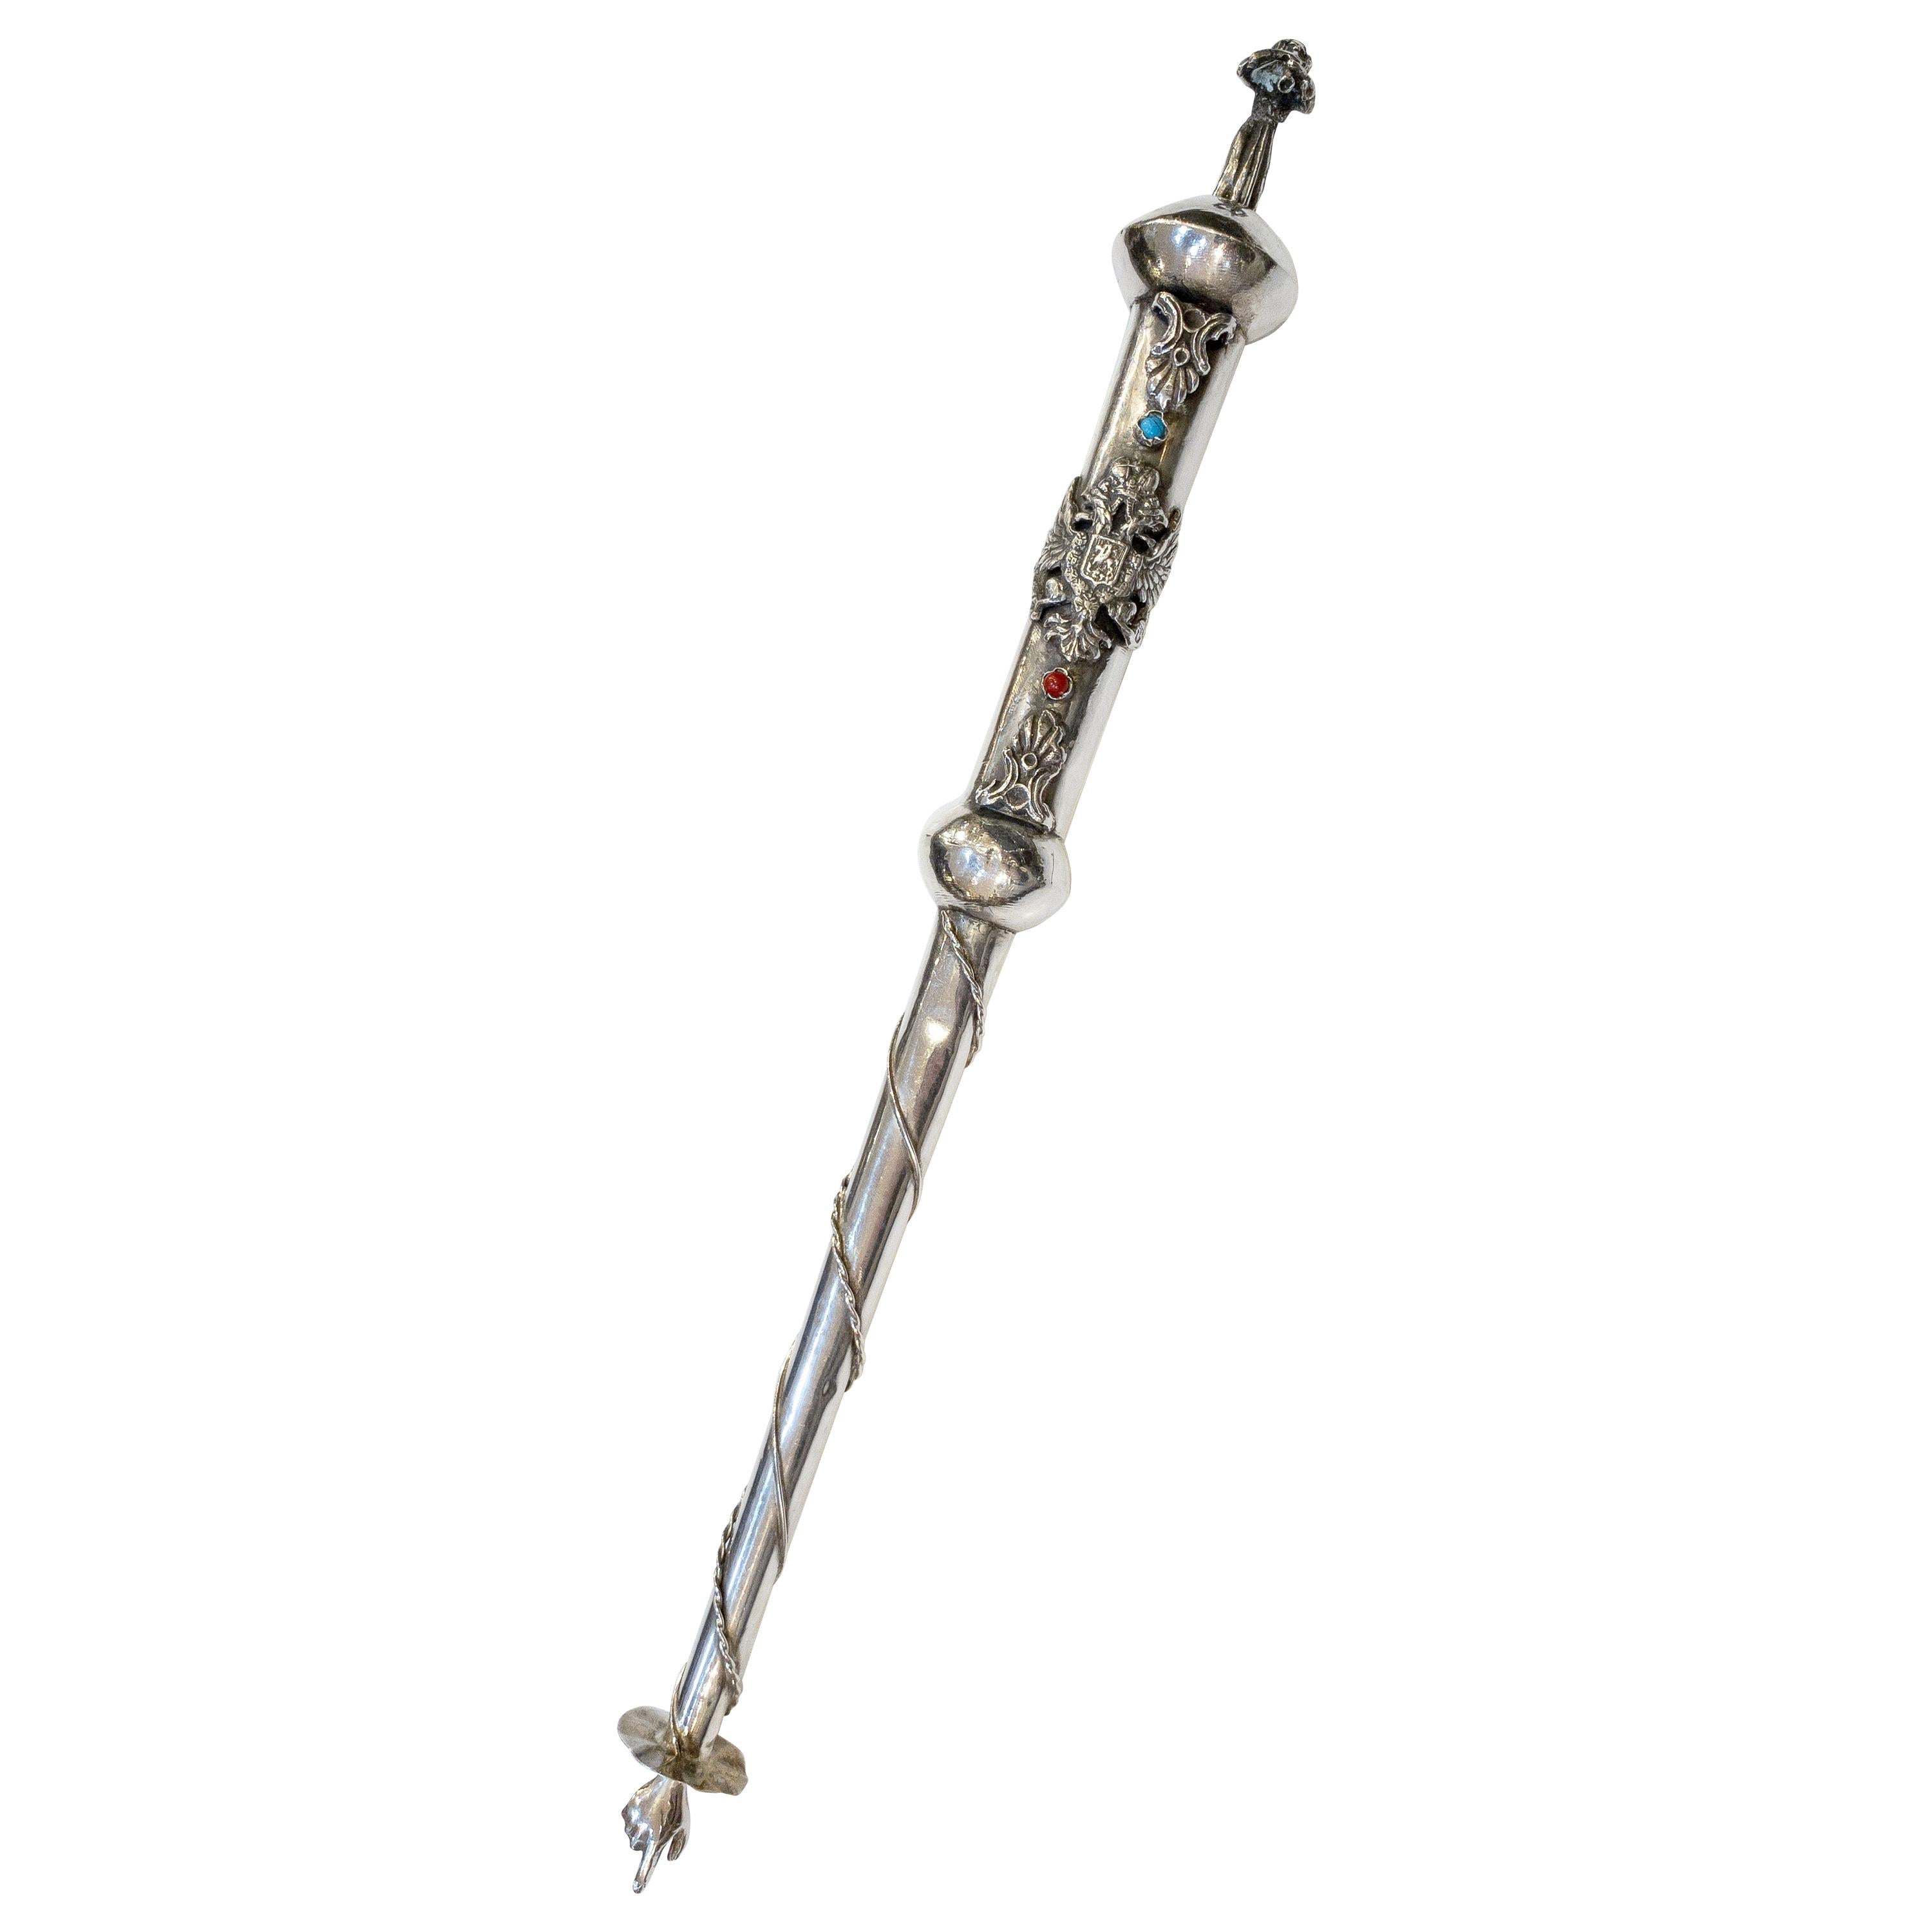 Jewish Yad or Torah Pointer of Silver with Inset Stones